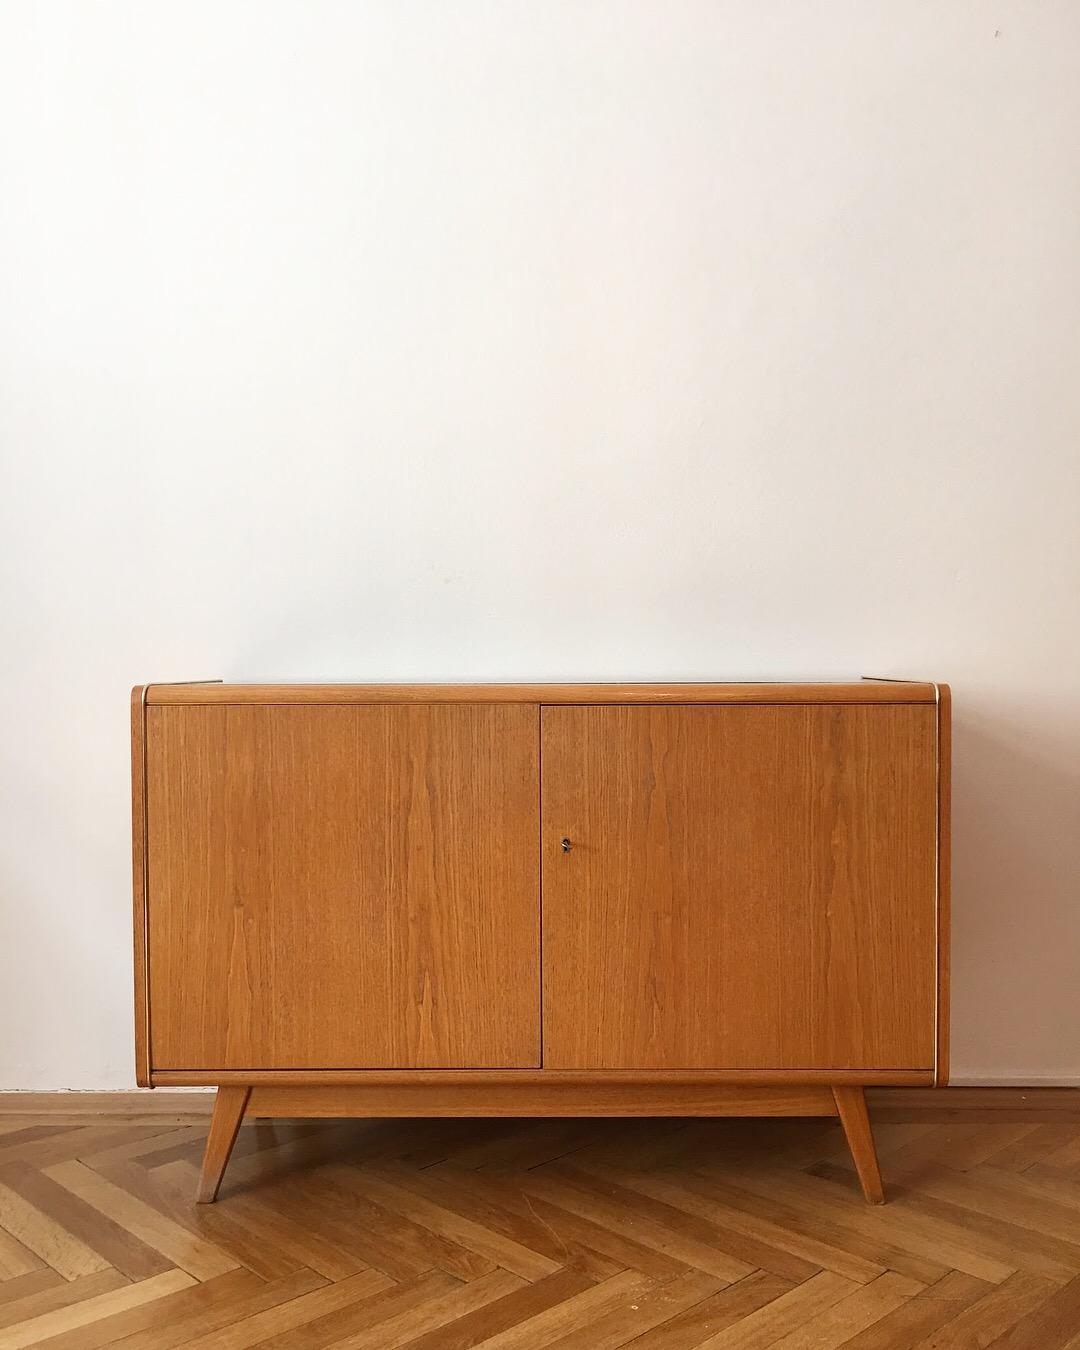 Chest of drawers from 1960s – like a brand new. Perfect condition.
Made in Czechoslovakia in town Sobeslav – brand Jitona.